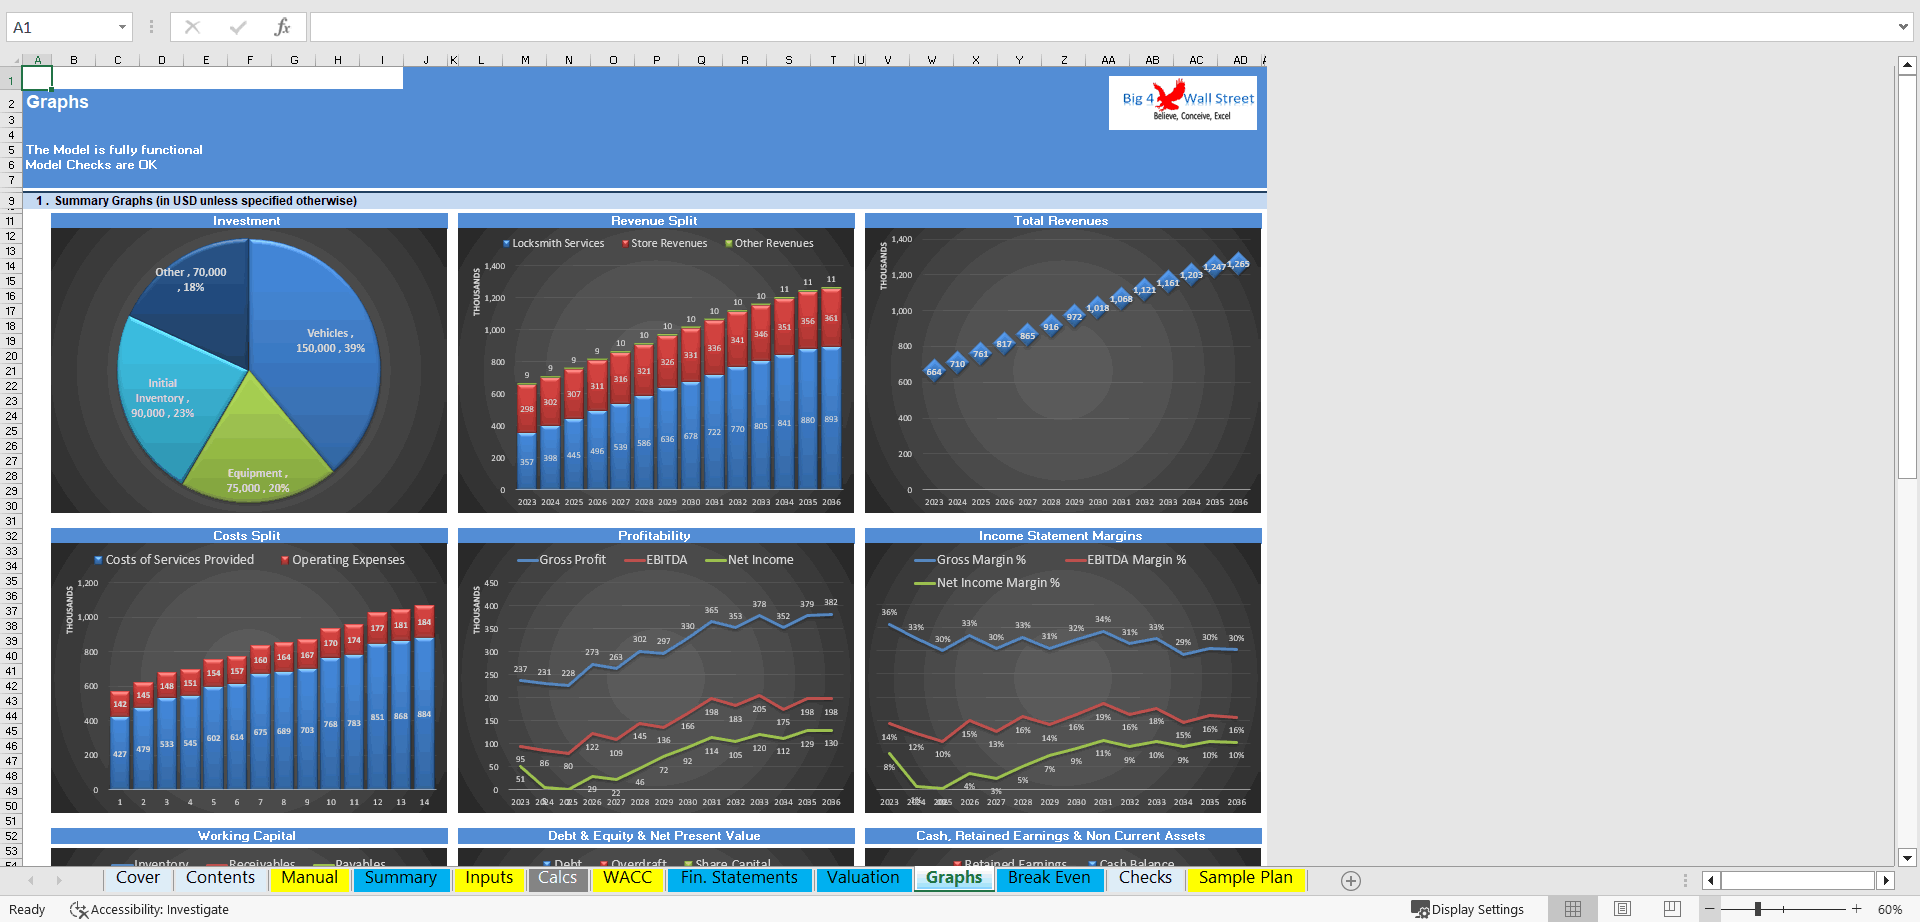 Locksmith Business - DCF 10 Year Financial Model (Excel template (XLSX)) Preview Image